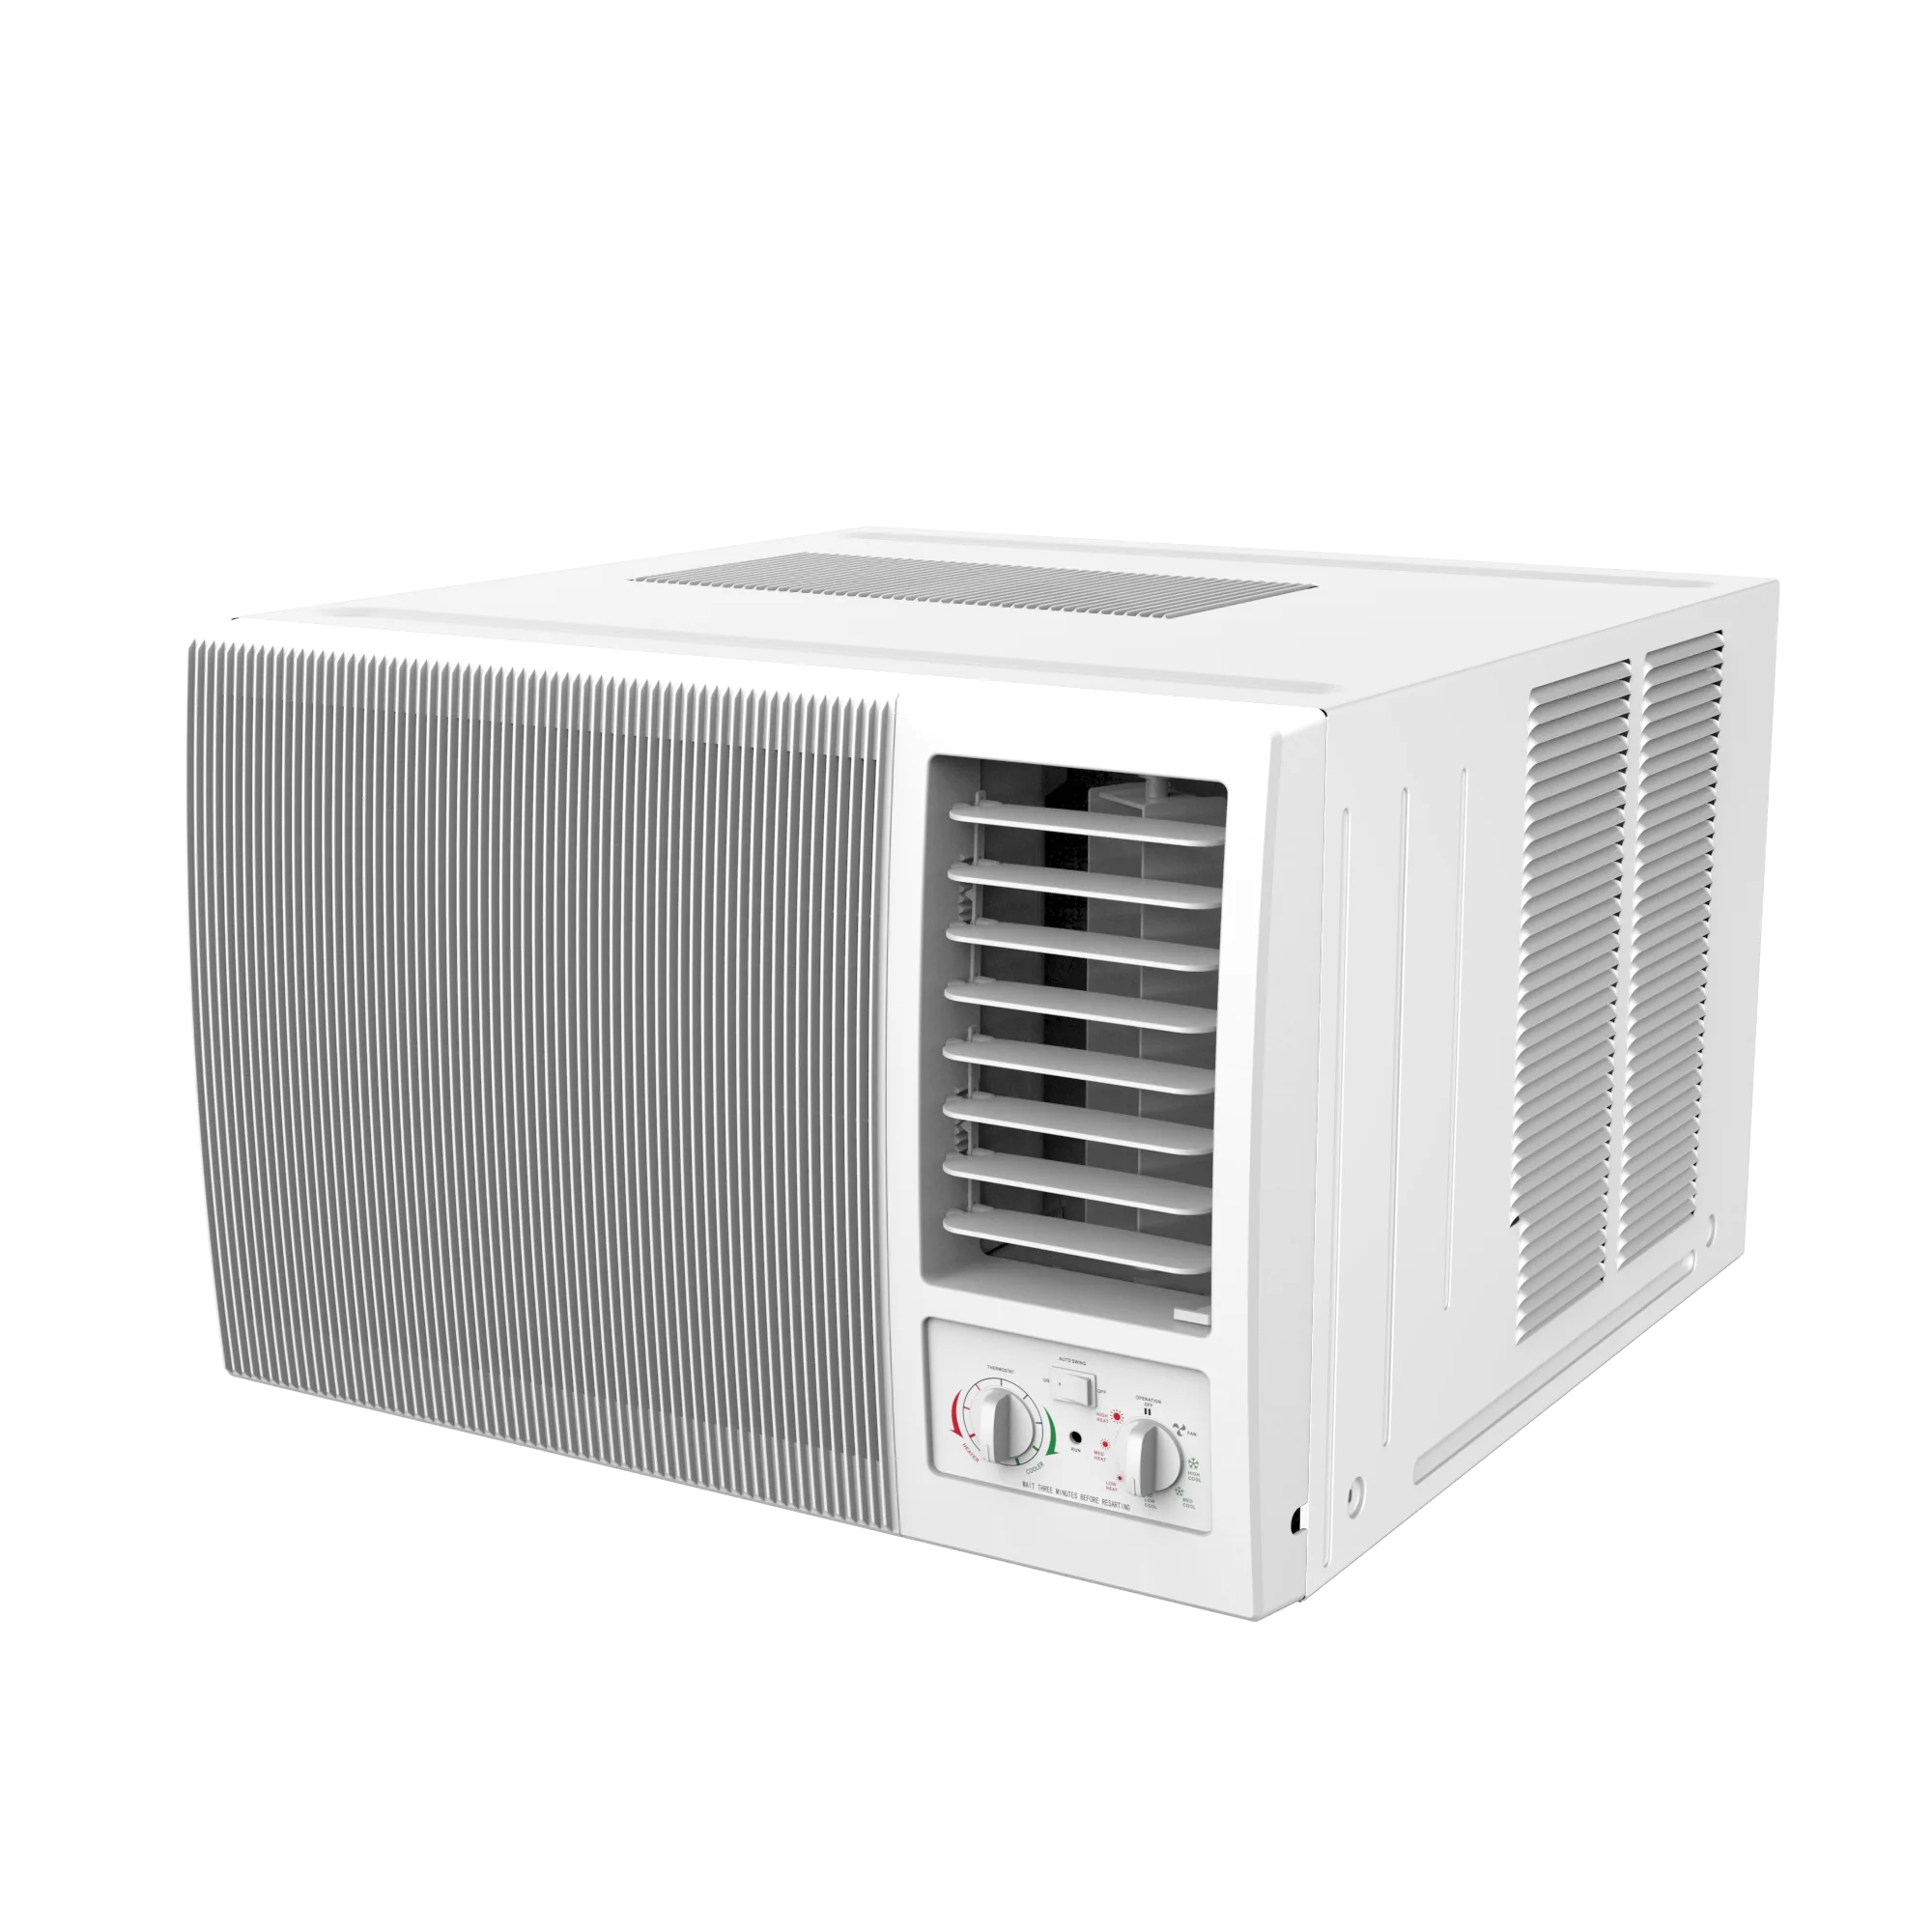 Cwc 18 Custom Hot Sale 220v 240v 50hz 60hz Mechanical Window Mounted Type Ac Air Conditioner Buy Window Air Conditioners Air Conditioners Air Conditioner Sale Product On Alibaba Com